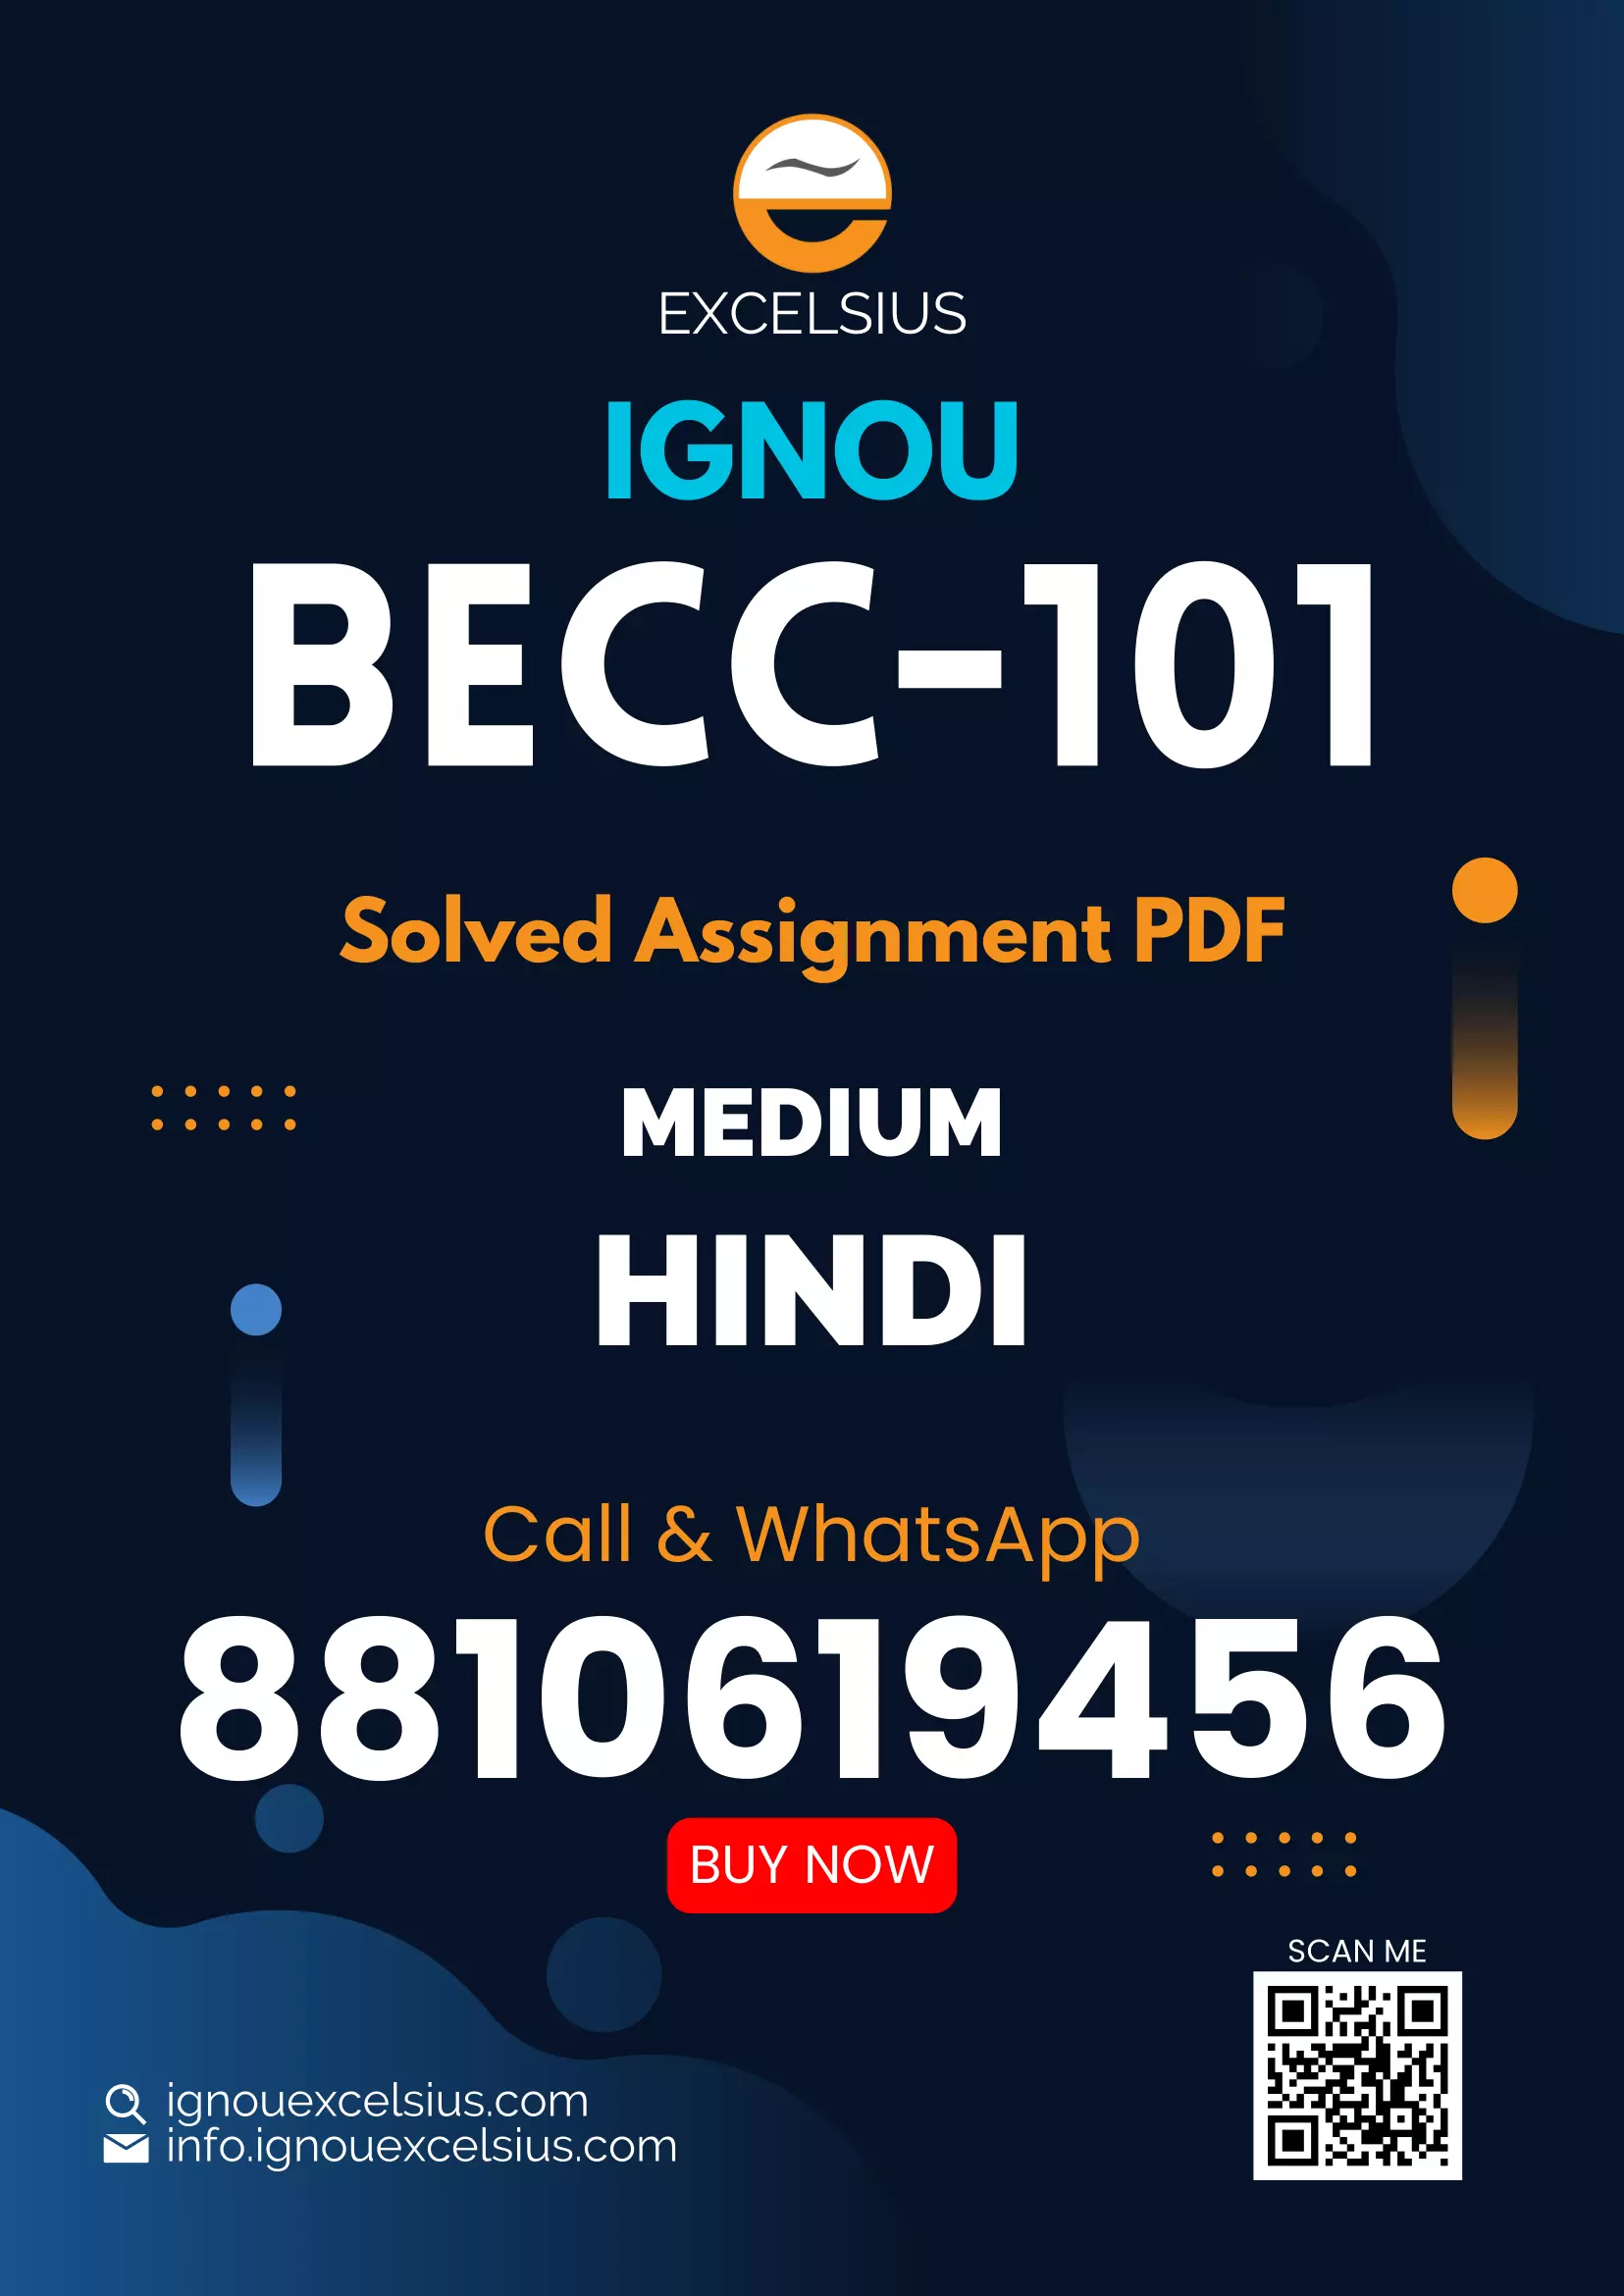 IGNOU BECC-101 - Introductory Microeconomics, Latest Solved Assignment-July 2022 - January 2023